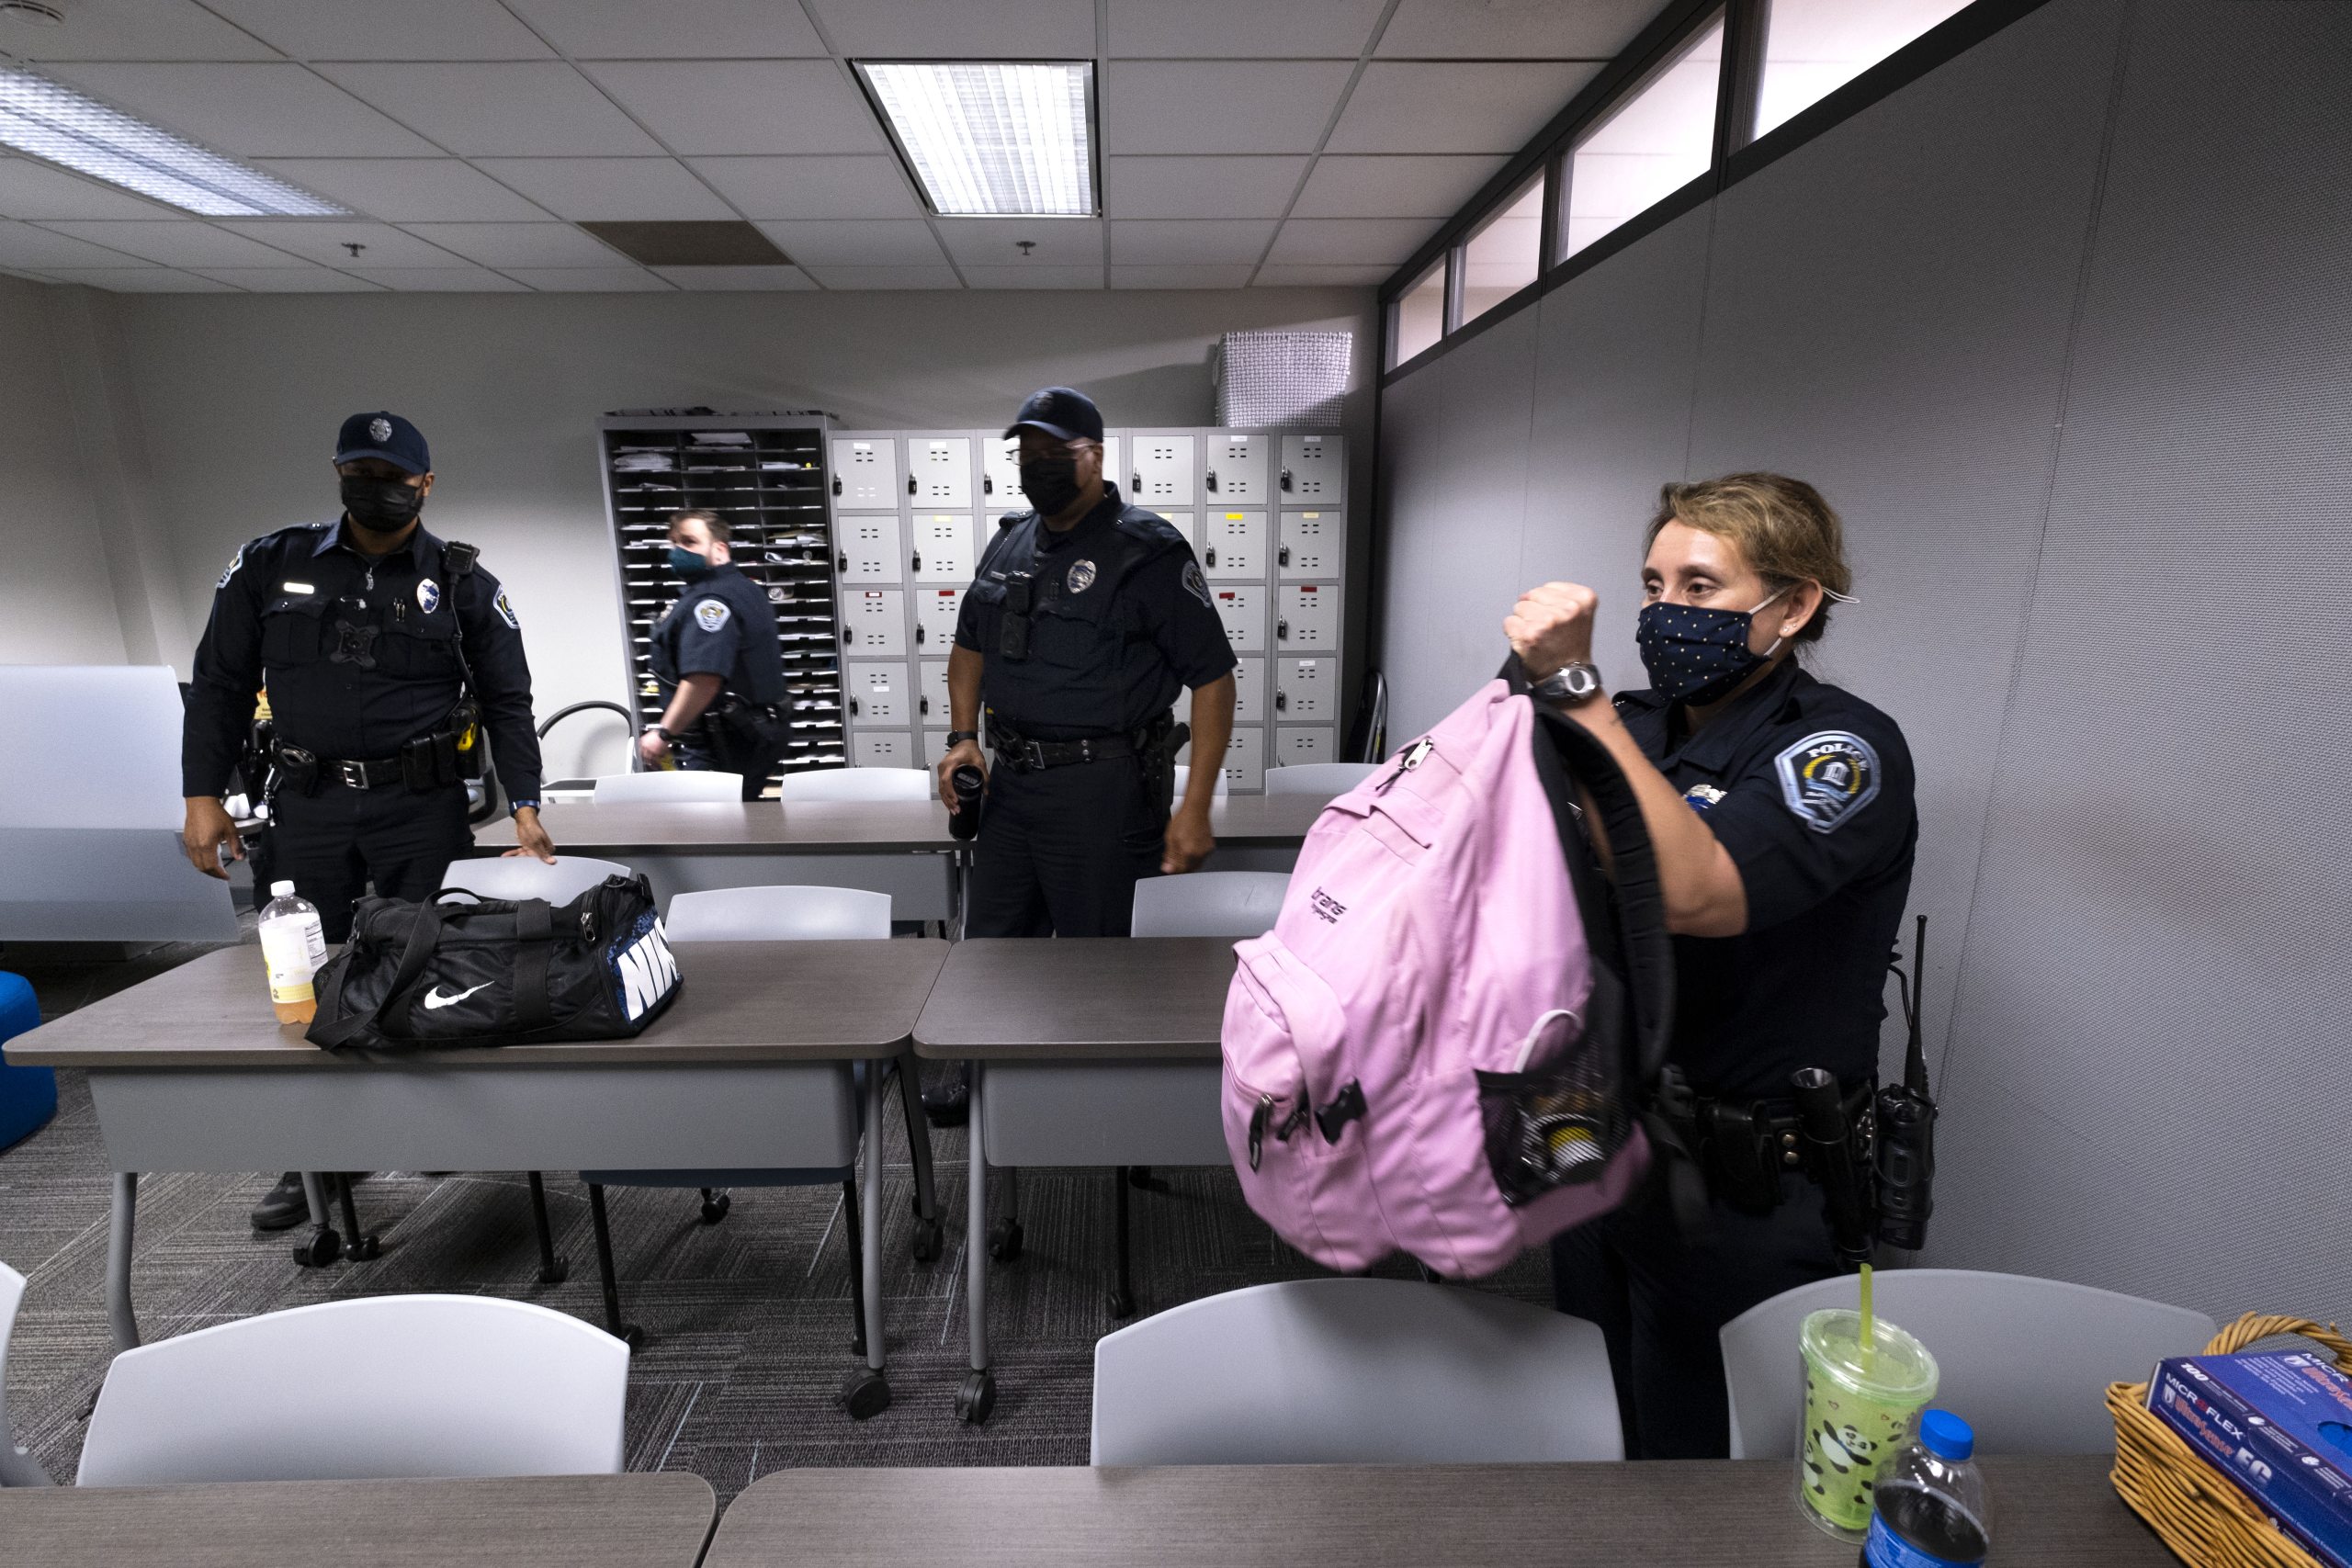 Female police officer lifting large pink book bag, with three male officers in background. All wear Covid masks.